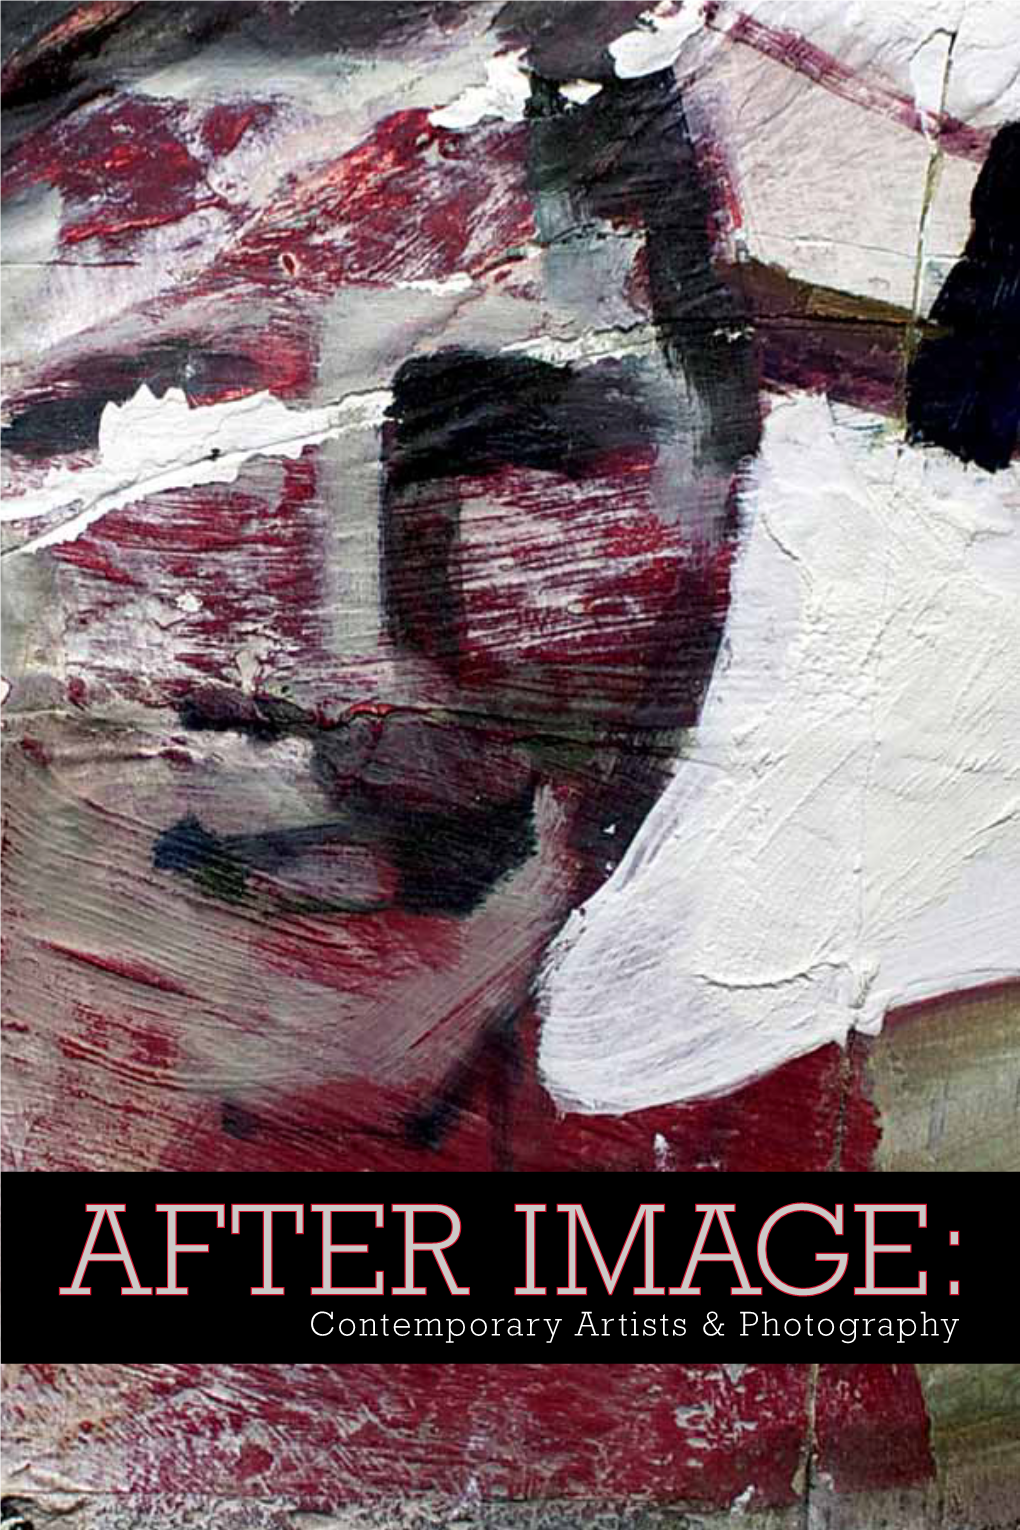 AFTER IMAGE: Contemporary Artists & Photography Ahpg Art House Productions Gallery AFTER IMAGE: Contemporary Artists & Photography